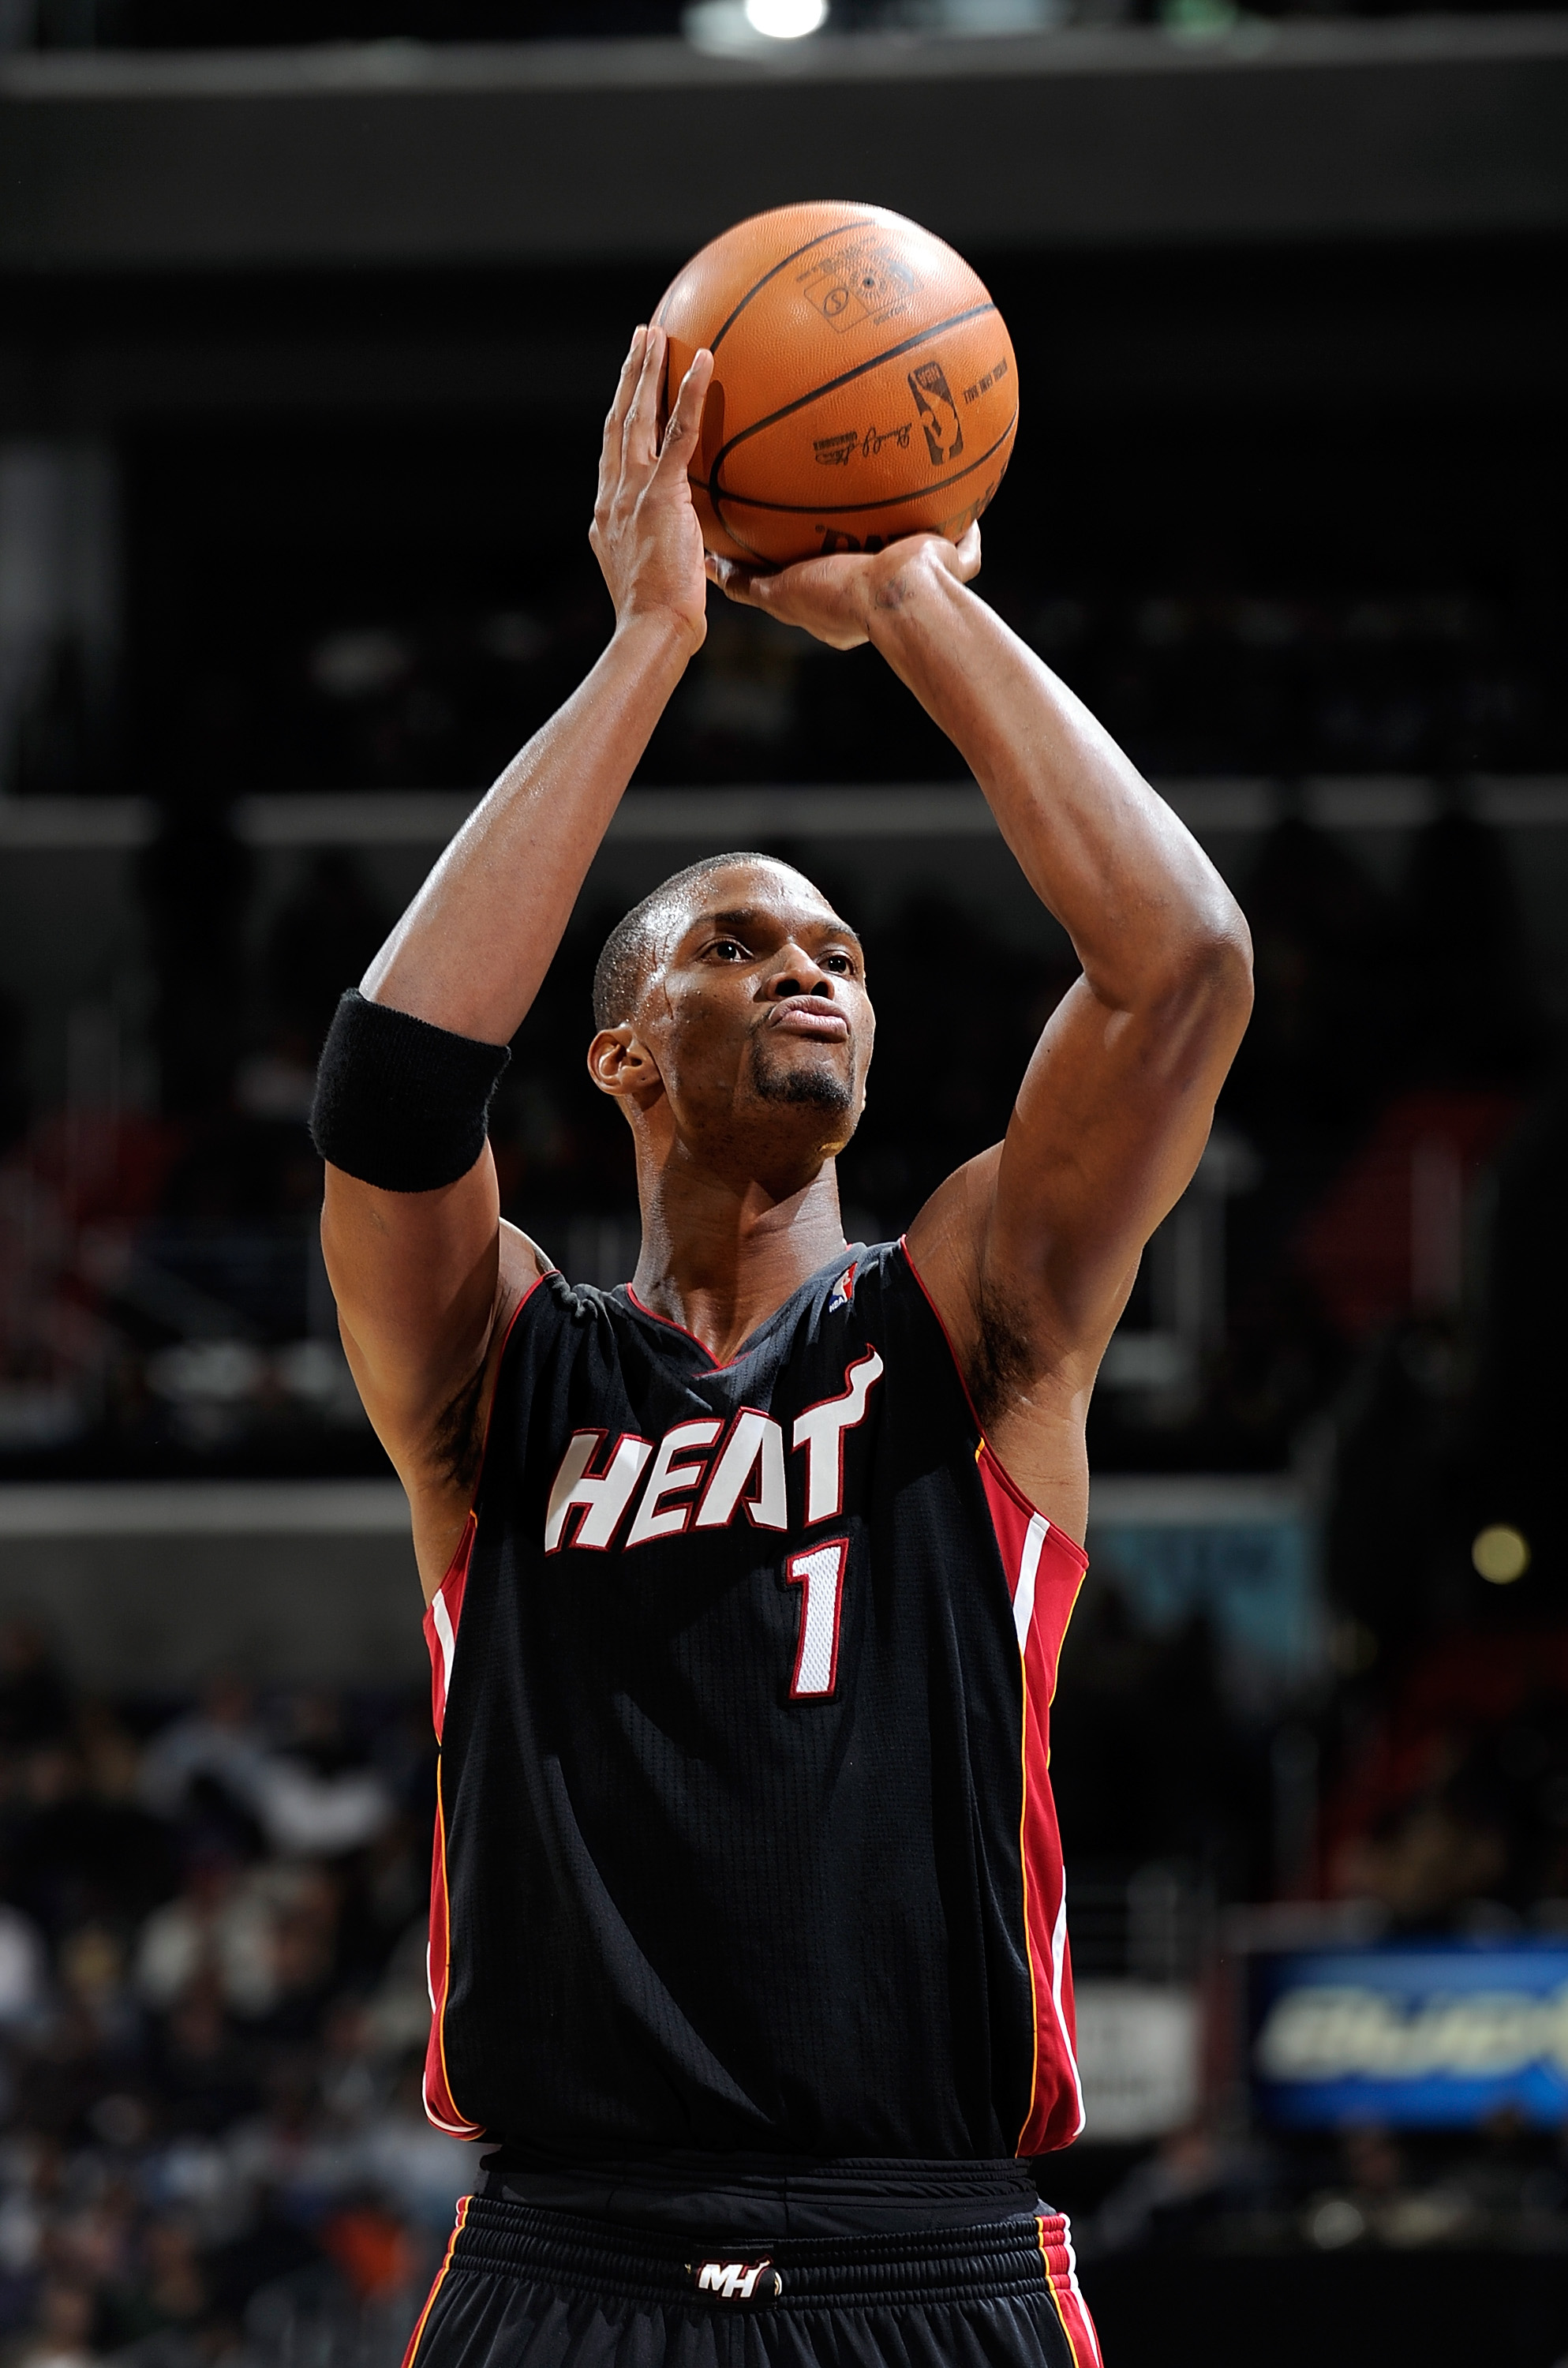 WASHINGTON, DC - DECEMBER 18:  Chris Bosh #1 of the Miami Heat shoots a free throw against the Washington Wizards at the Verizon Center on December 18, 2010 in Washington, DC. NOTE TO USER: User expressly acknowledges and agrees that, by downloading and o